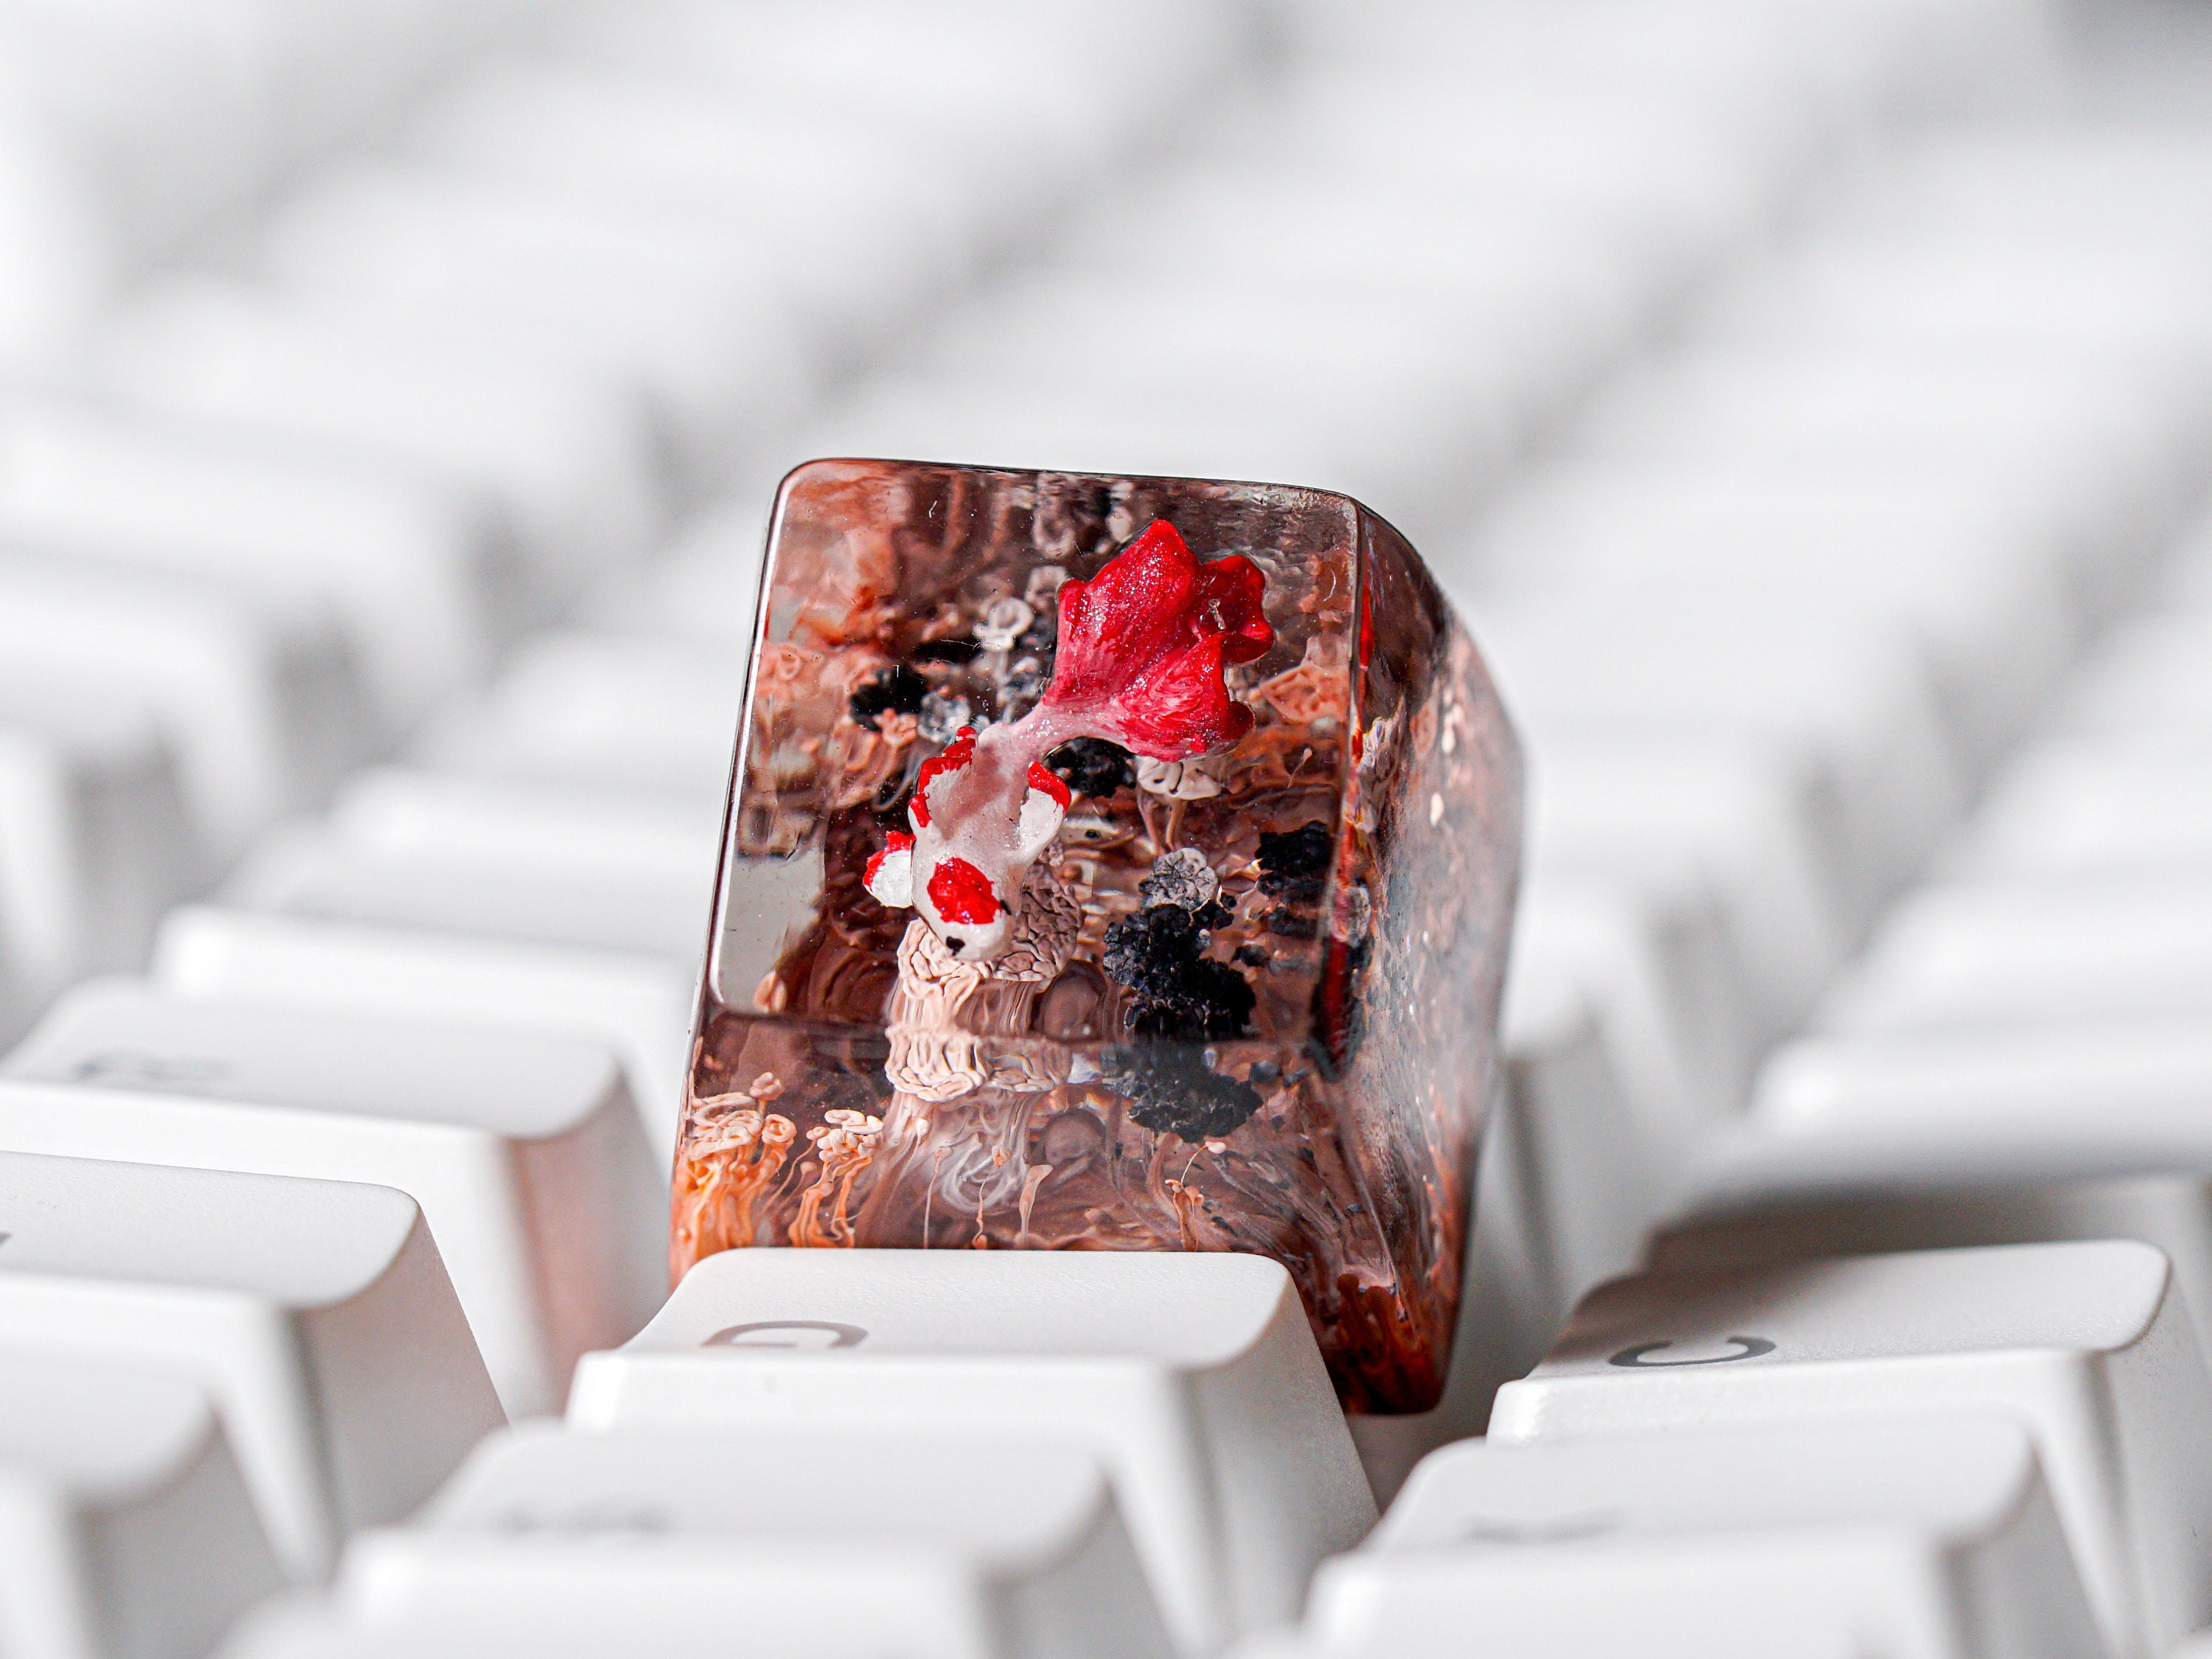 White Red Fish Keycap, Artisan Keycap, Resin Keycap, Keycap for MX Cherry Switches Keyboard, Gift for Him